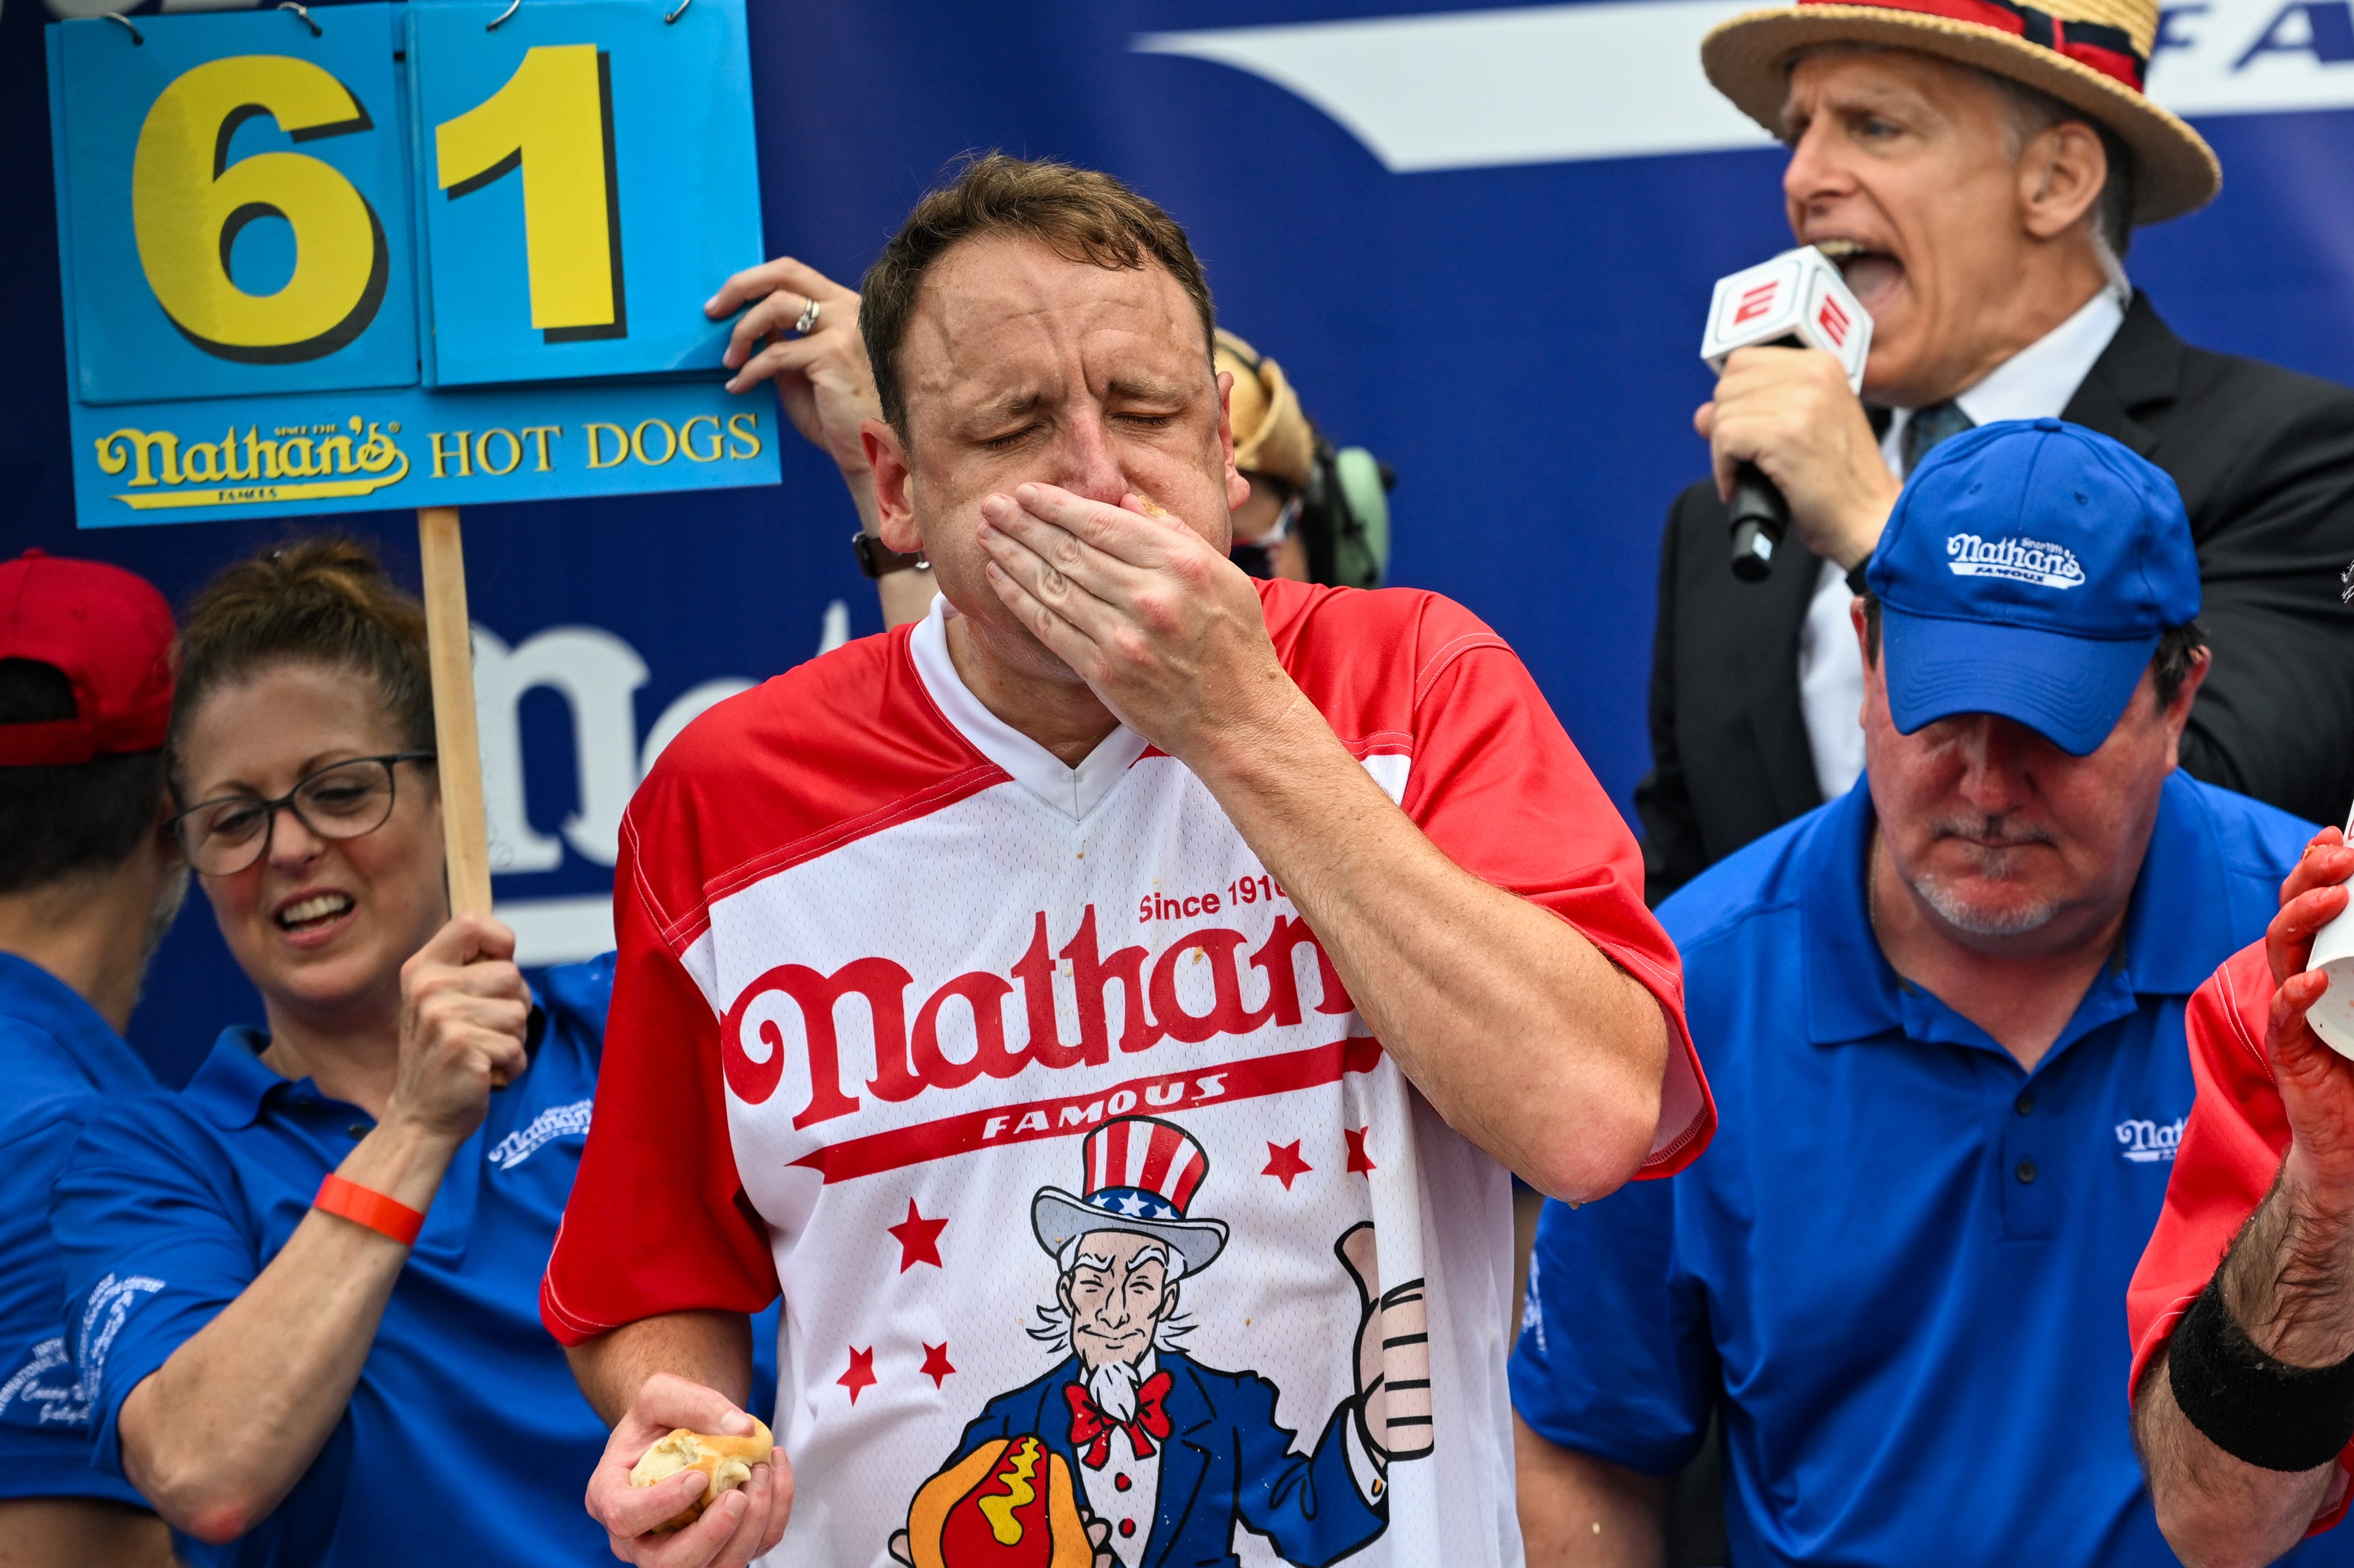 How many hot dogs yielded 16th Nathan’s contest win?